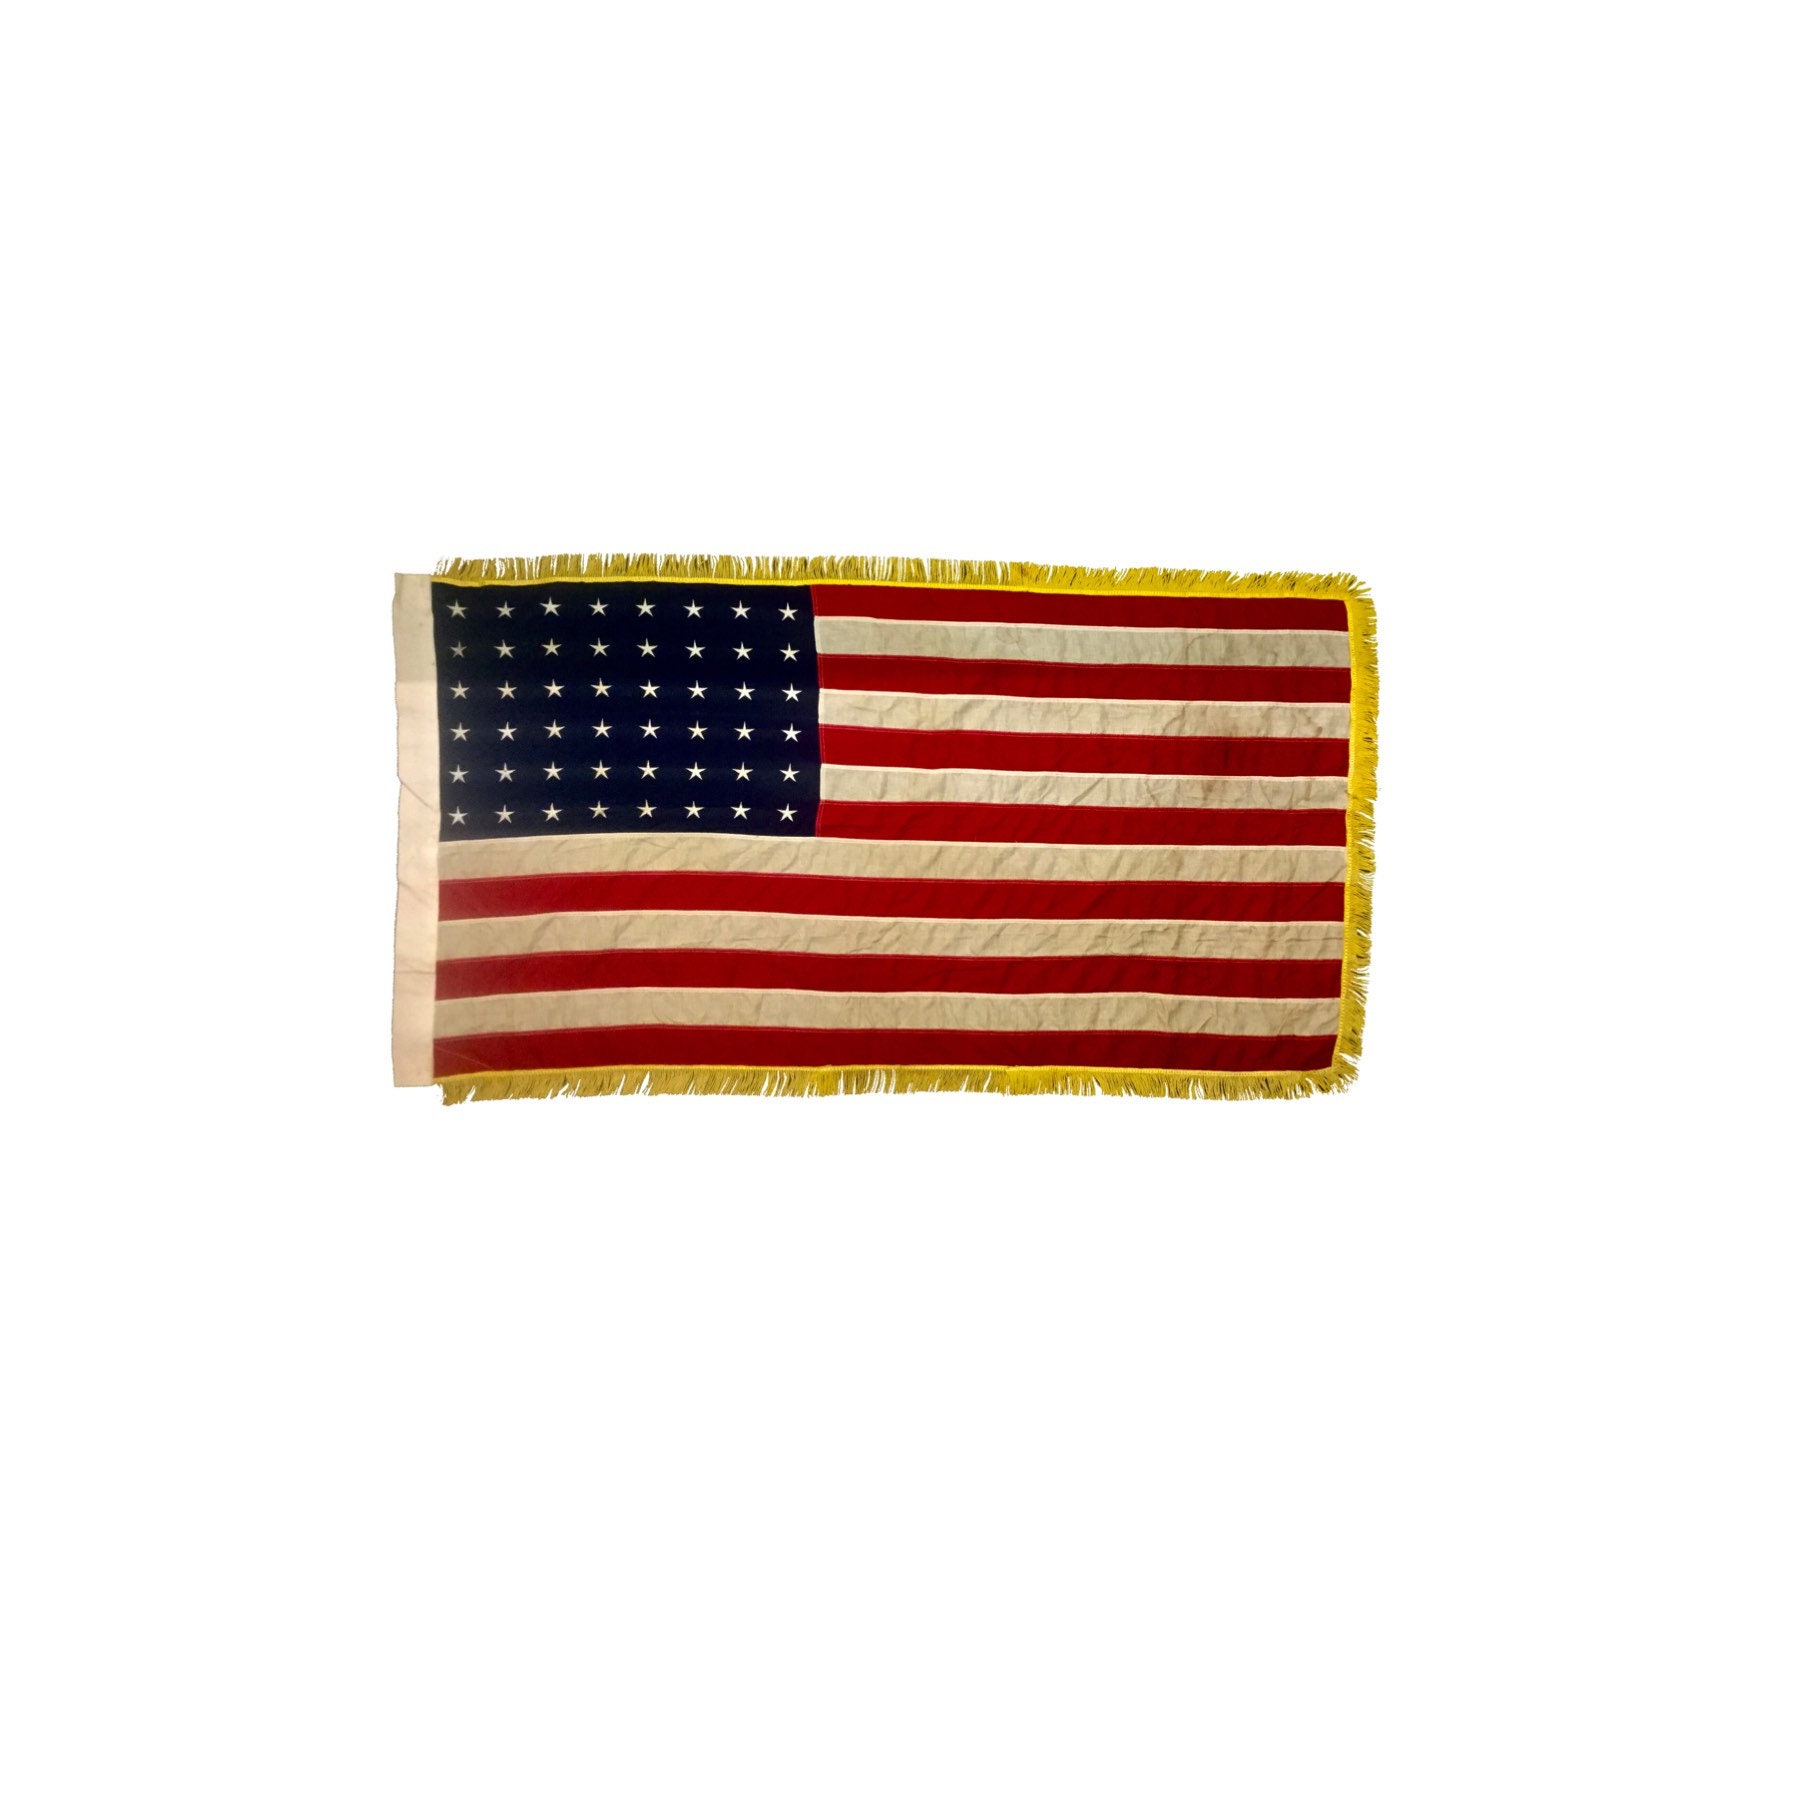 Vintage 48 Star Cotton-Wool Blend Authentic United States American Flag Featuring Early 19Th Century Yellow Tassel Design Accents